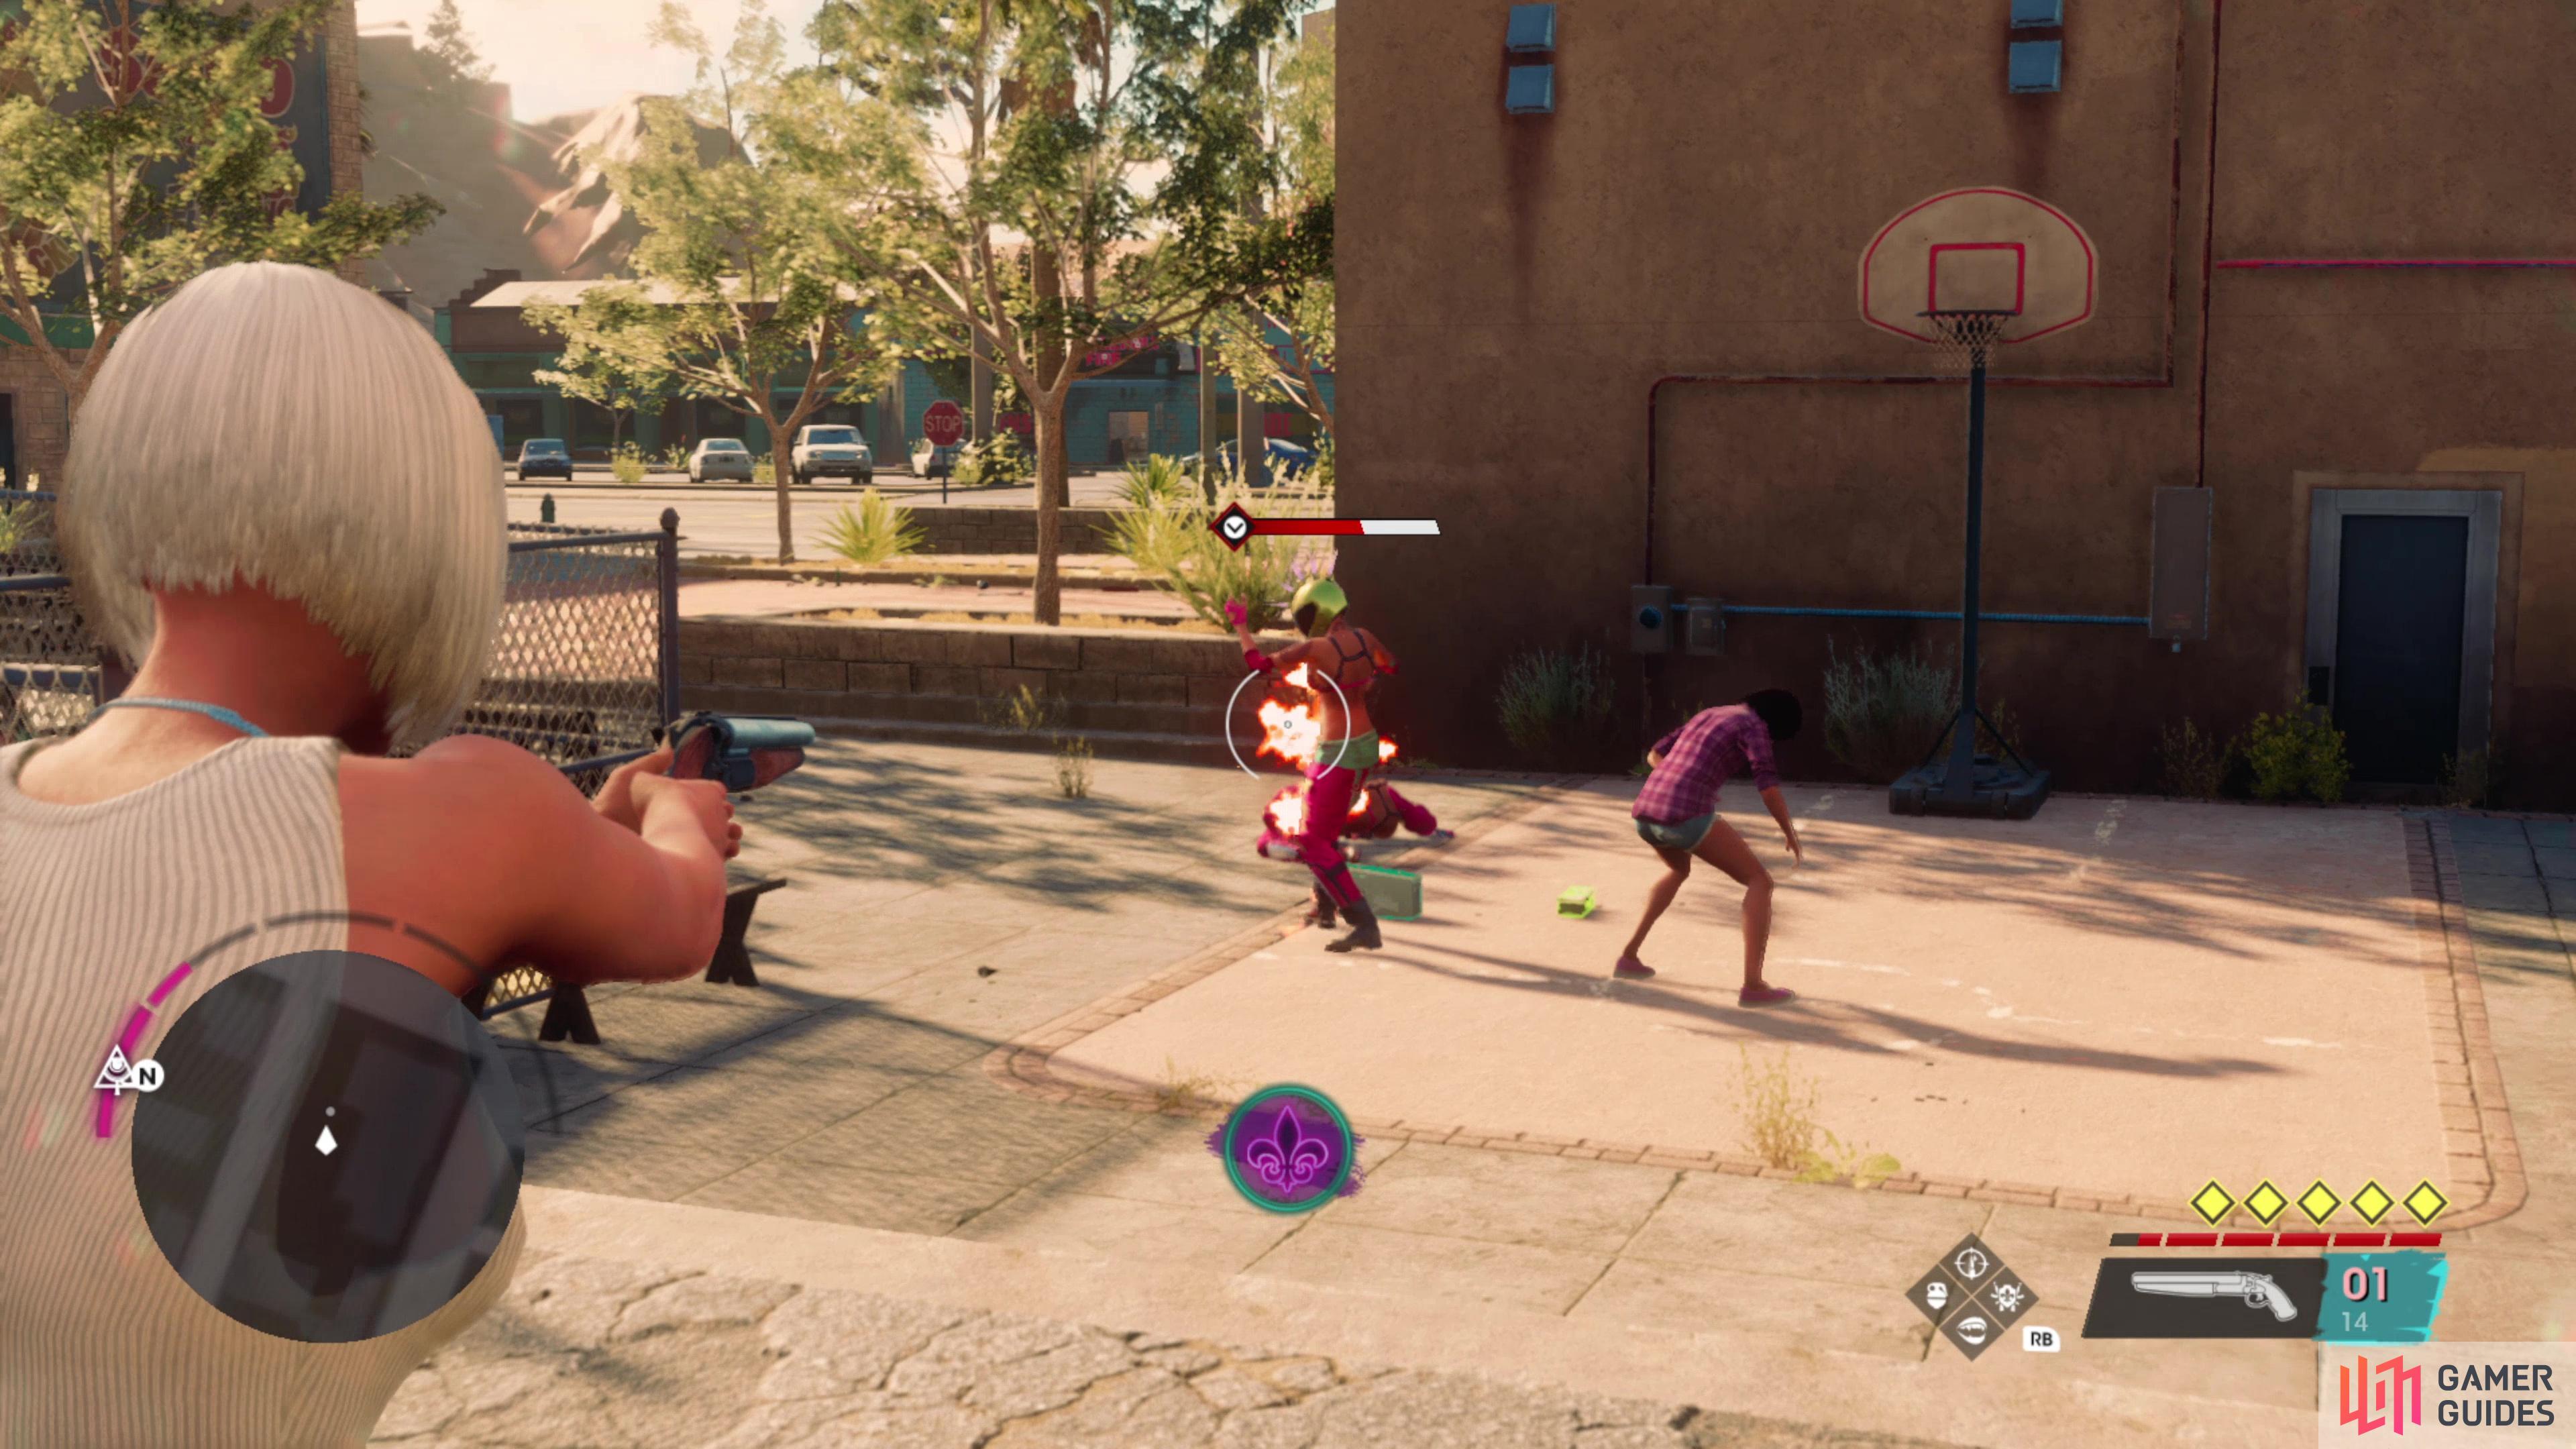 How do you unlock signature abilities in Saints Row? Here's how to do a barrel  roll!